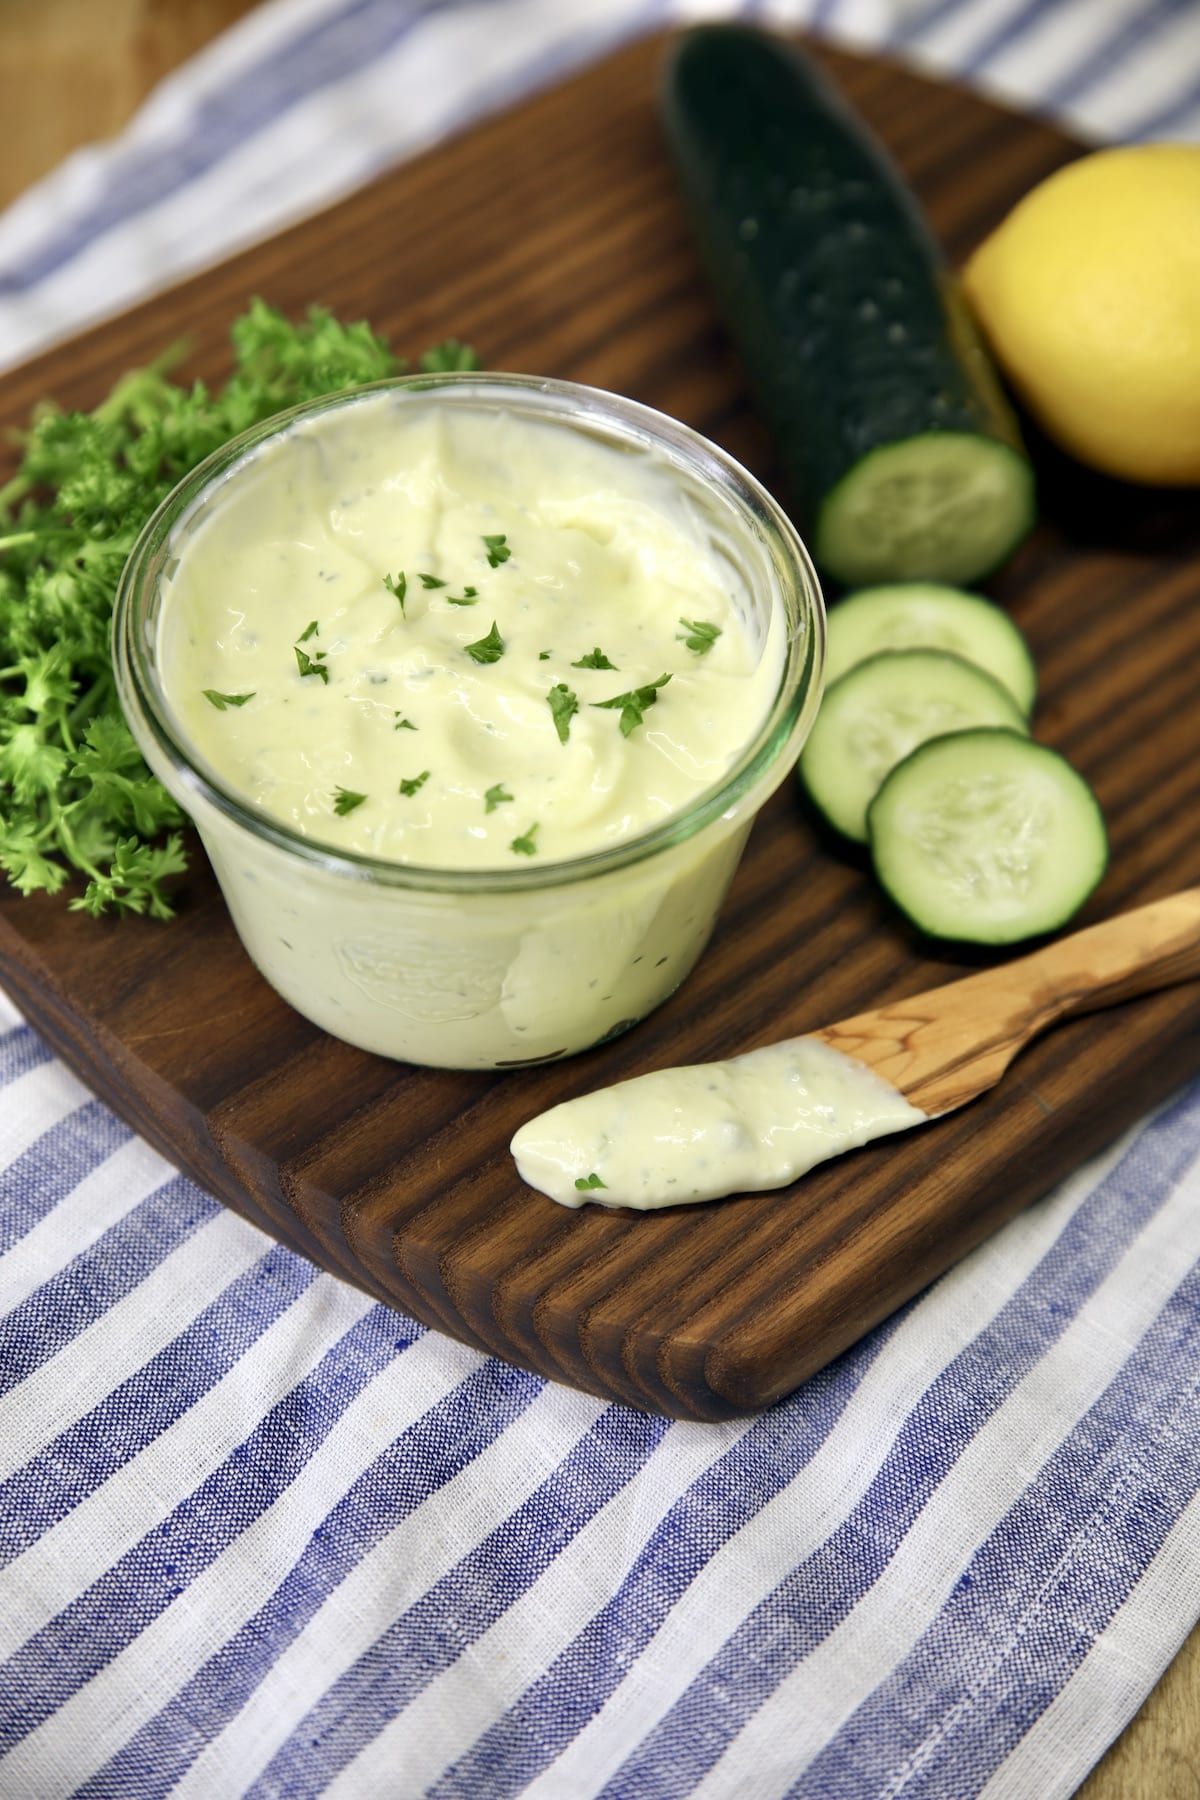 Jar of mayonnaise with sliced cucumbers and knife with mayo.